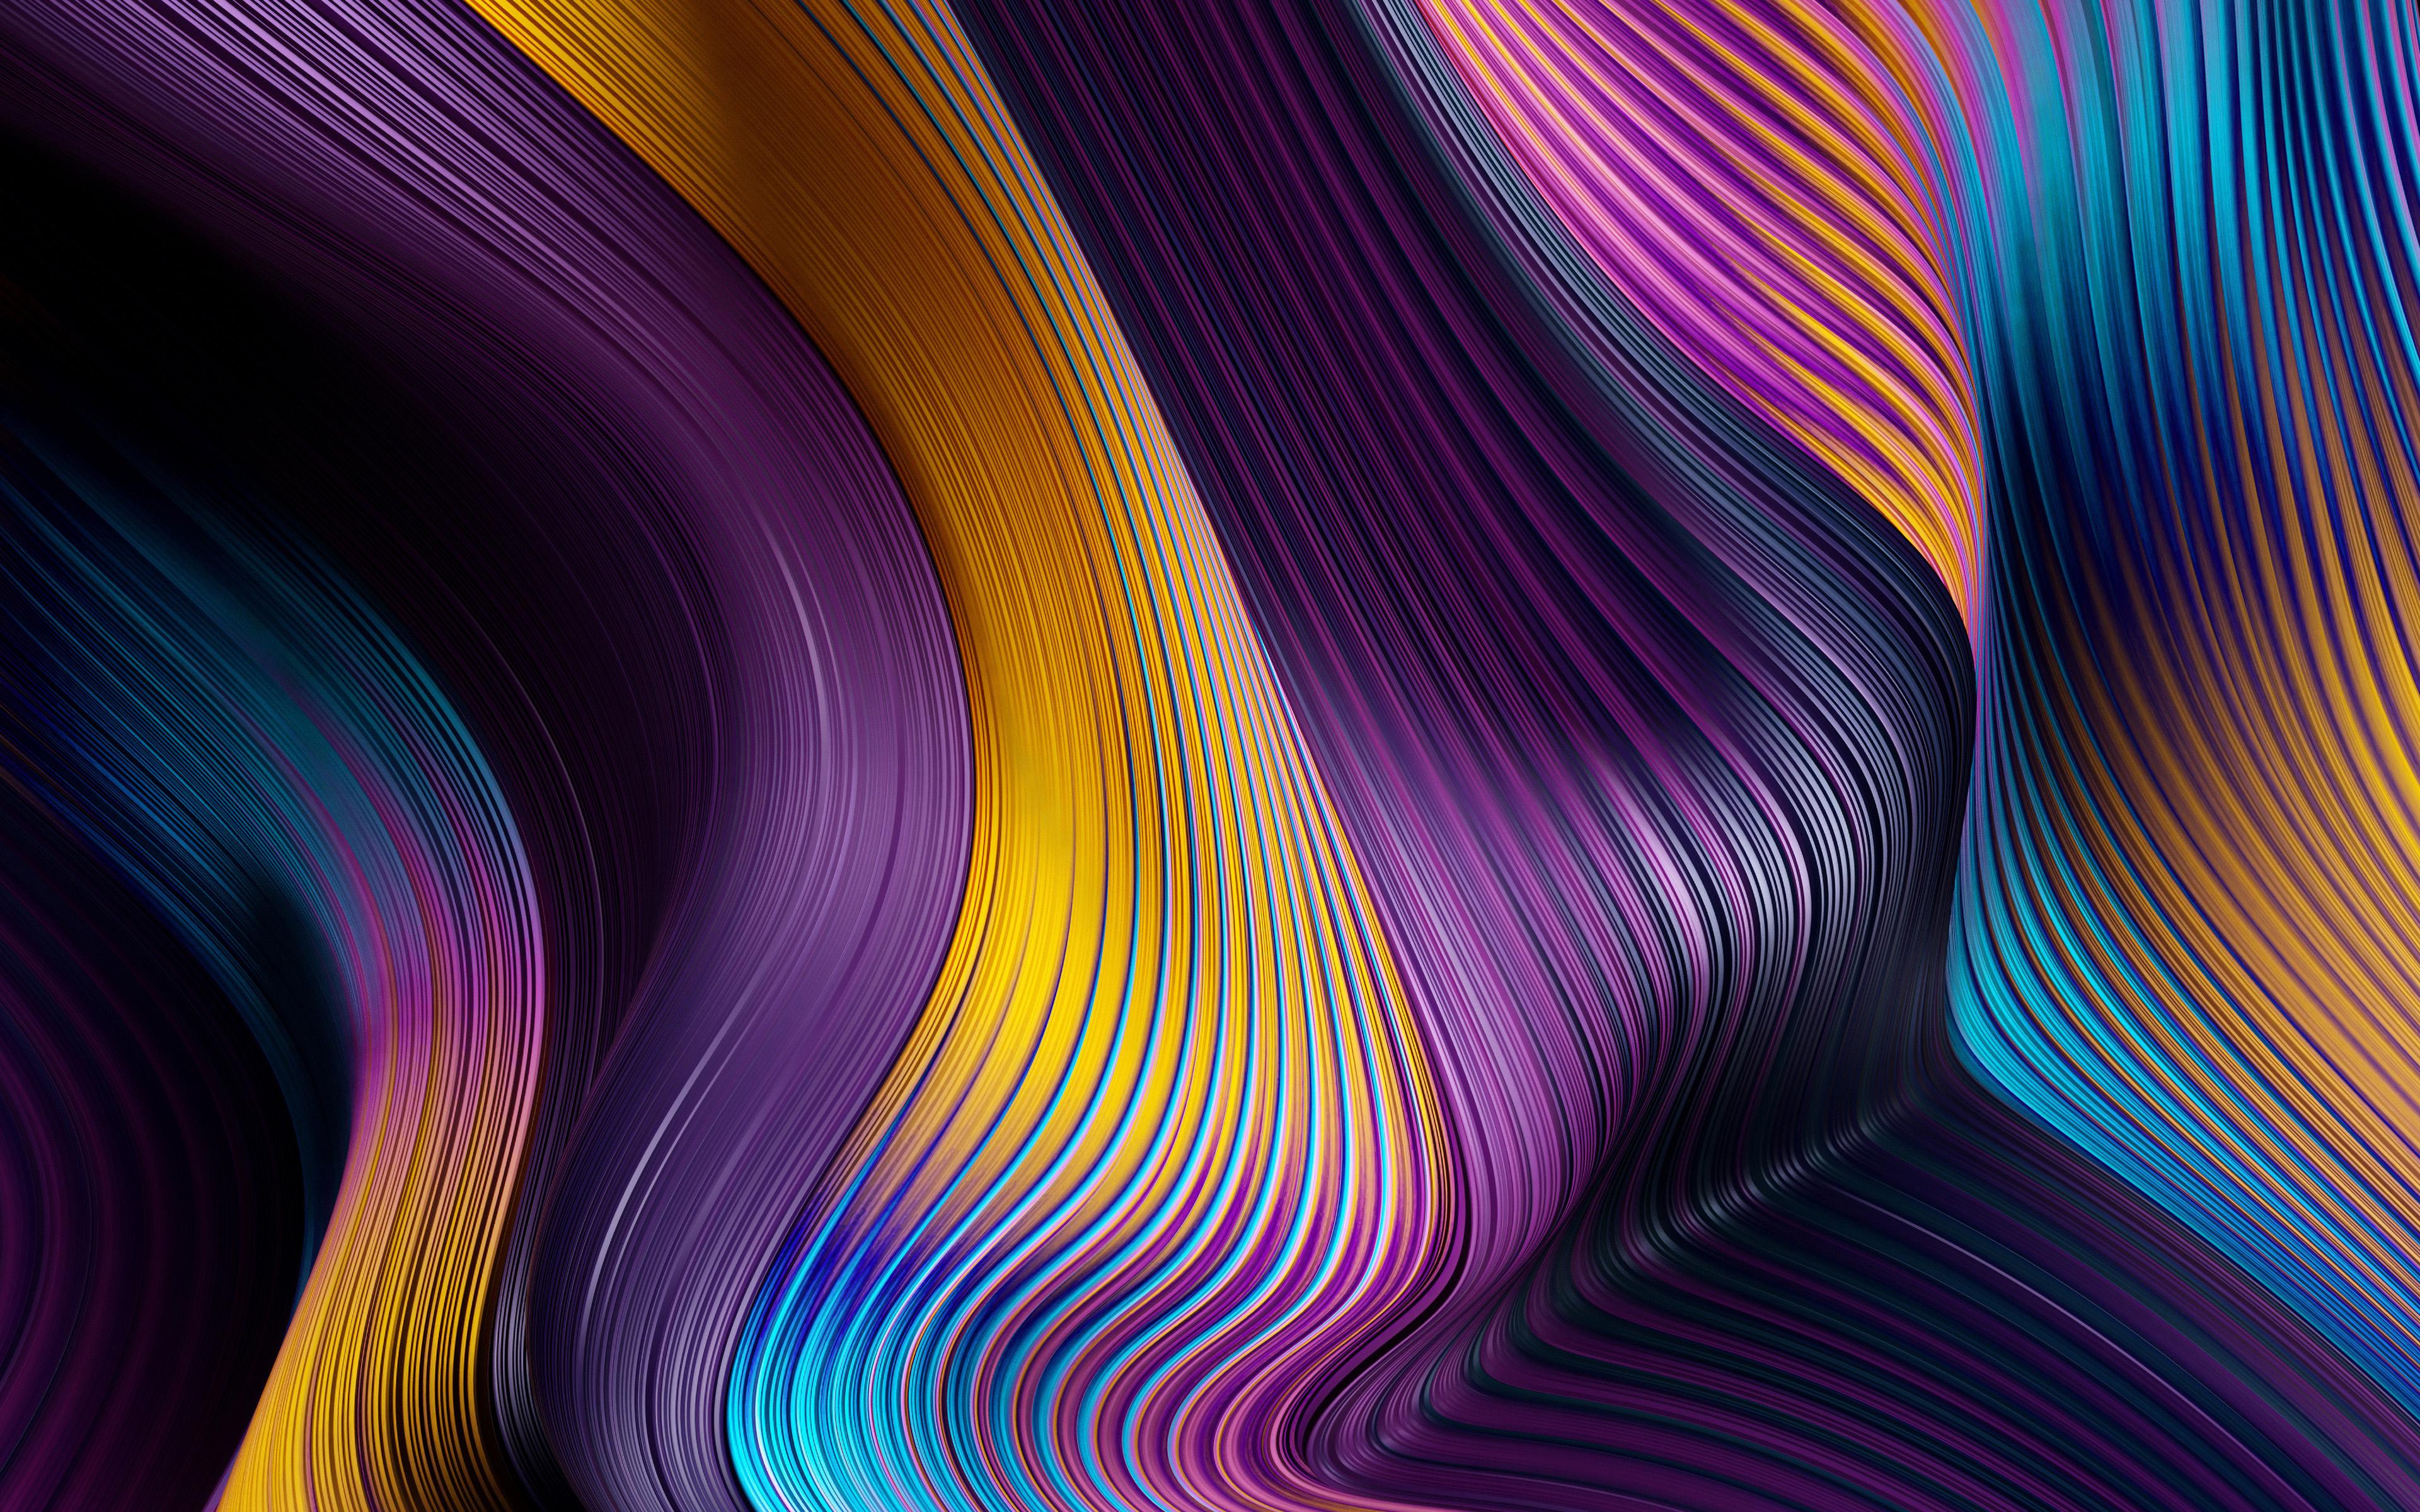 Download wallpaper 4k, colorful abstract waves, material design